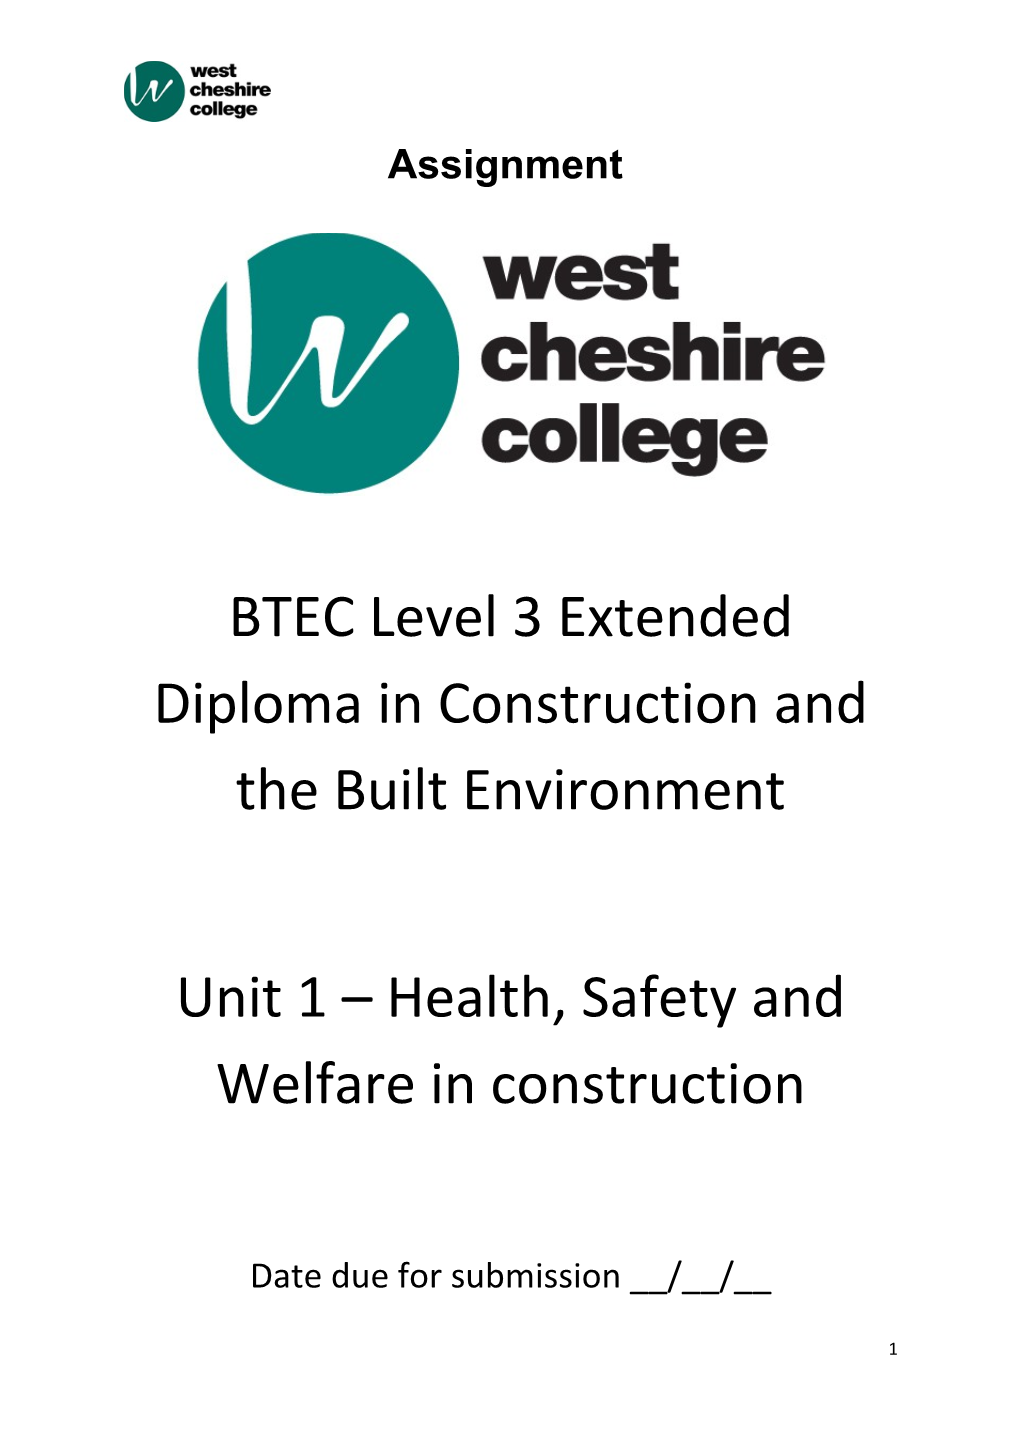 BTEC Level 3 Extended Diploma in Construction and the Built Environment